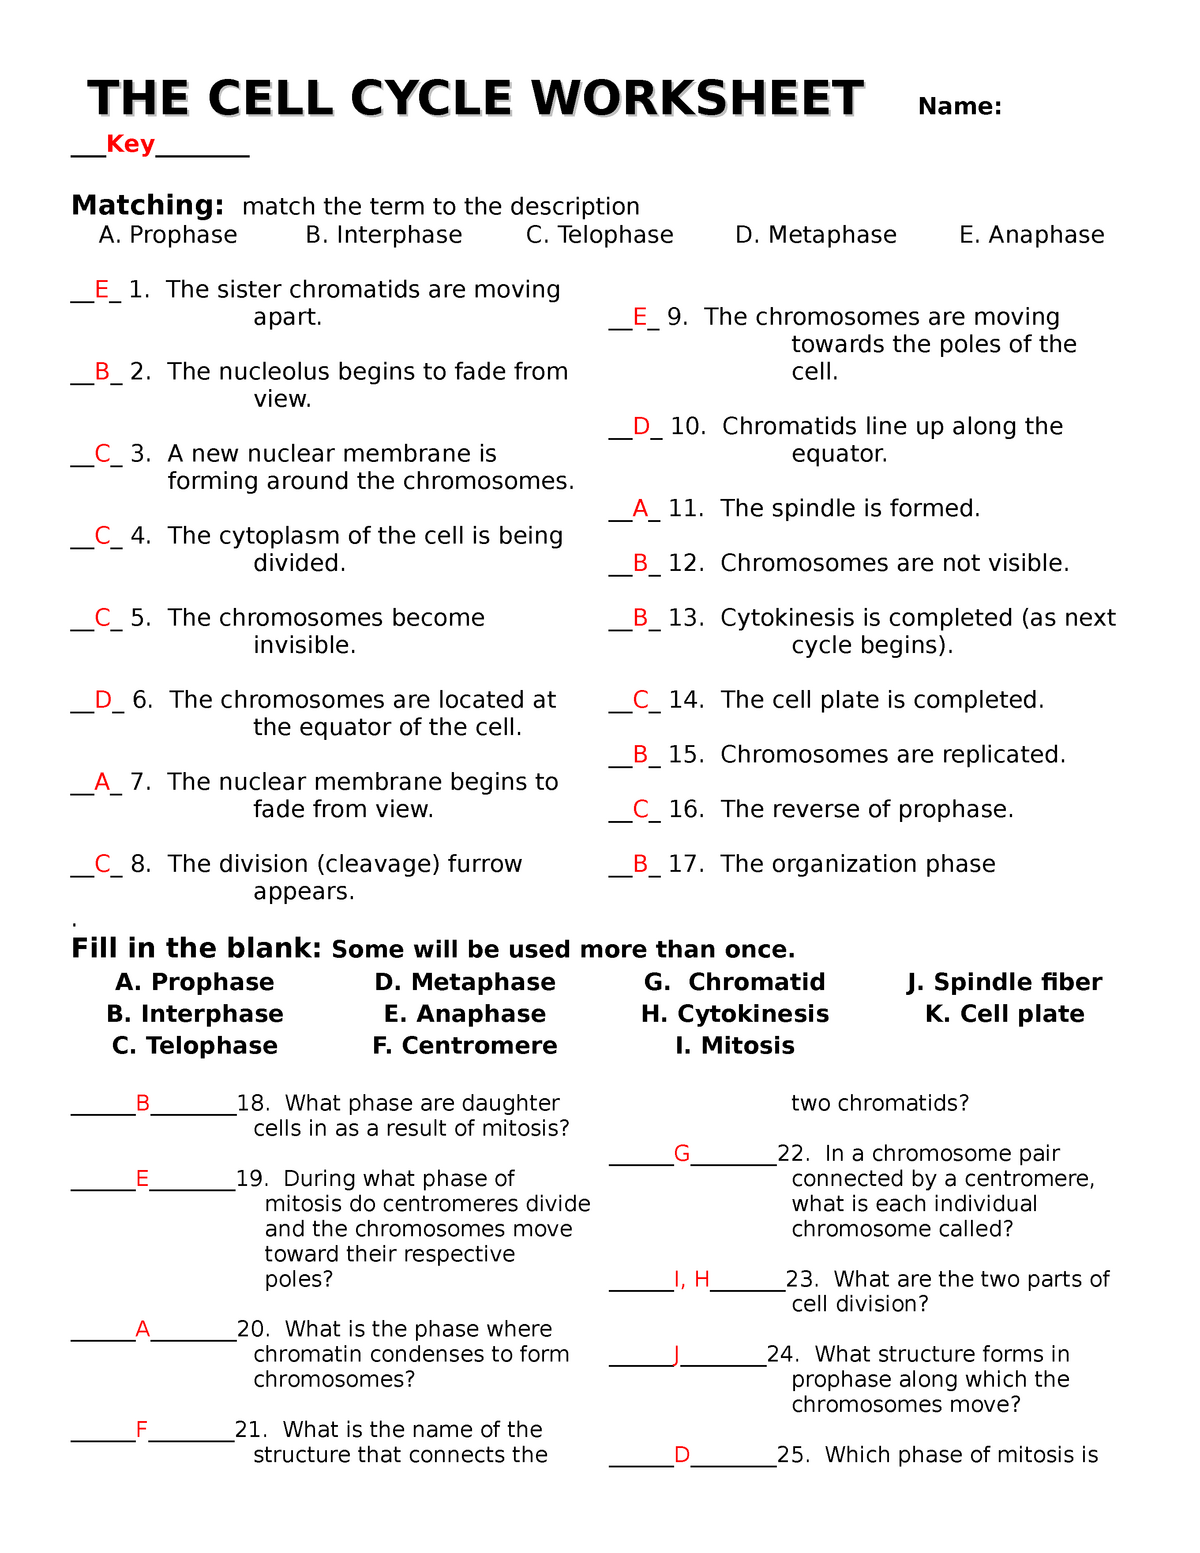 The-cell-cycle-worksheet with answers - StuDocu For Cell Cycle And Mitosis Worksheet